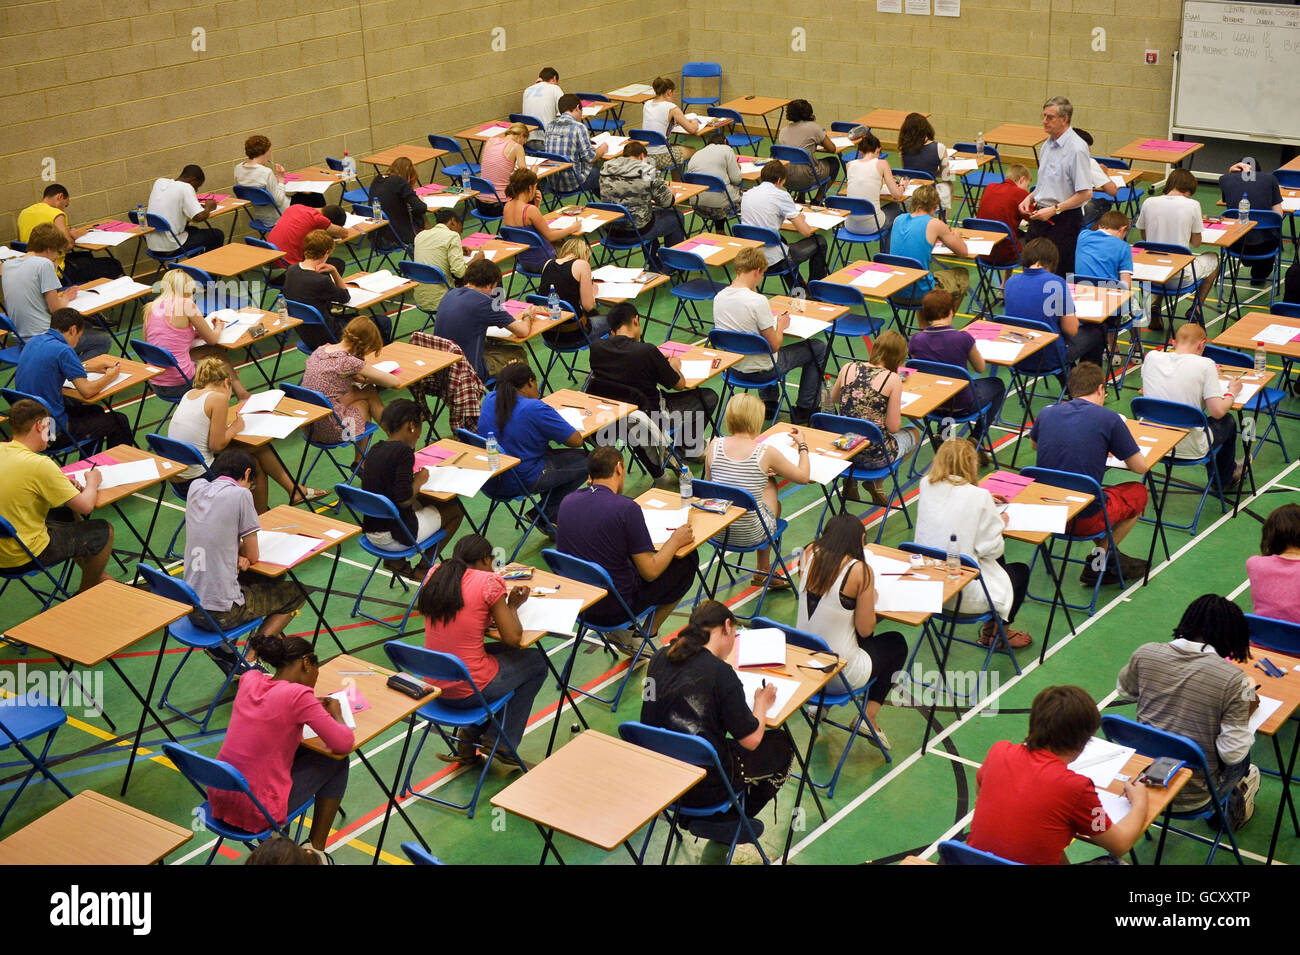 A-level students sit an A-level maths exam inside a sports hall Stock Photo